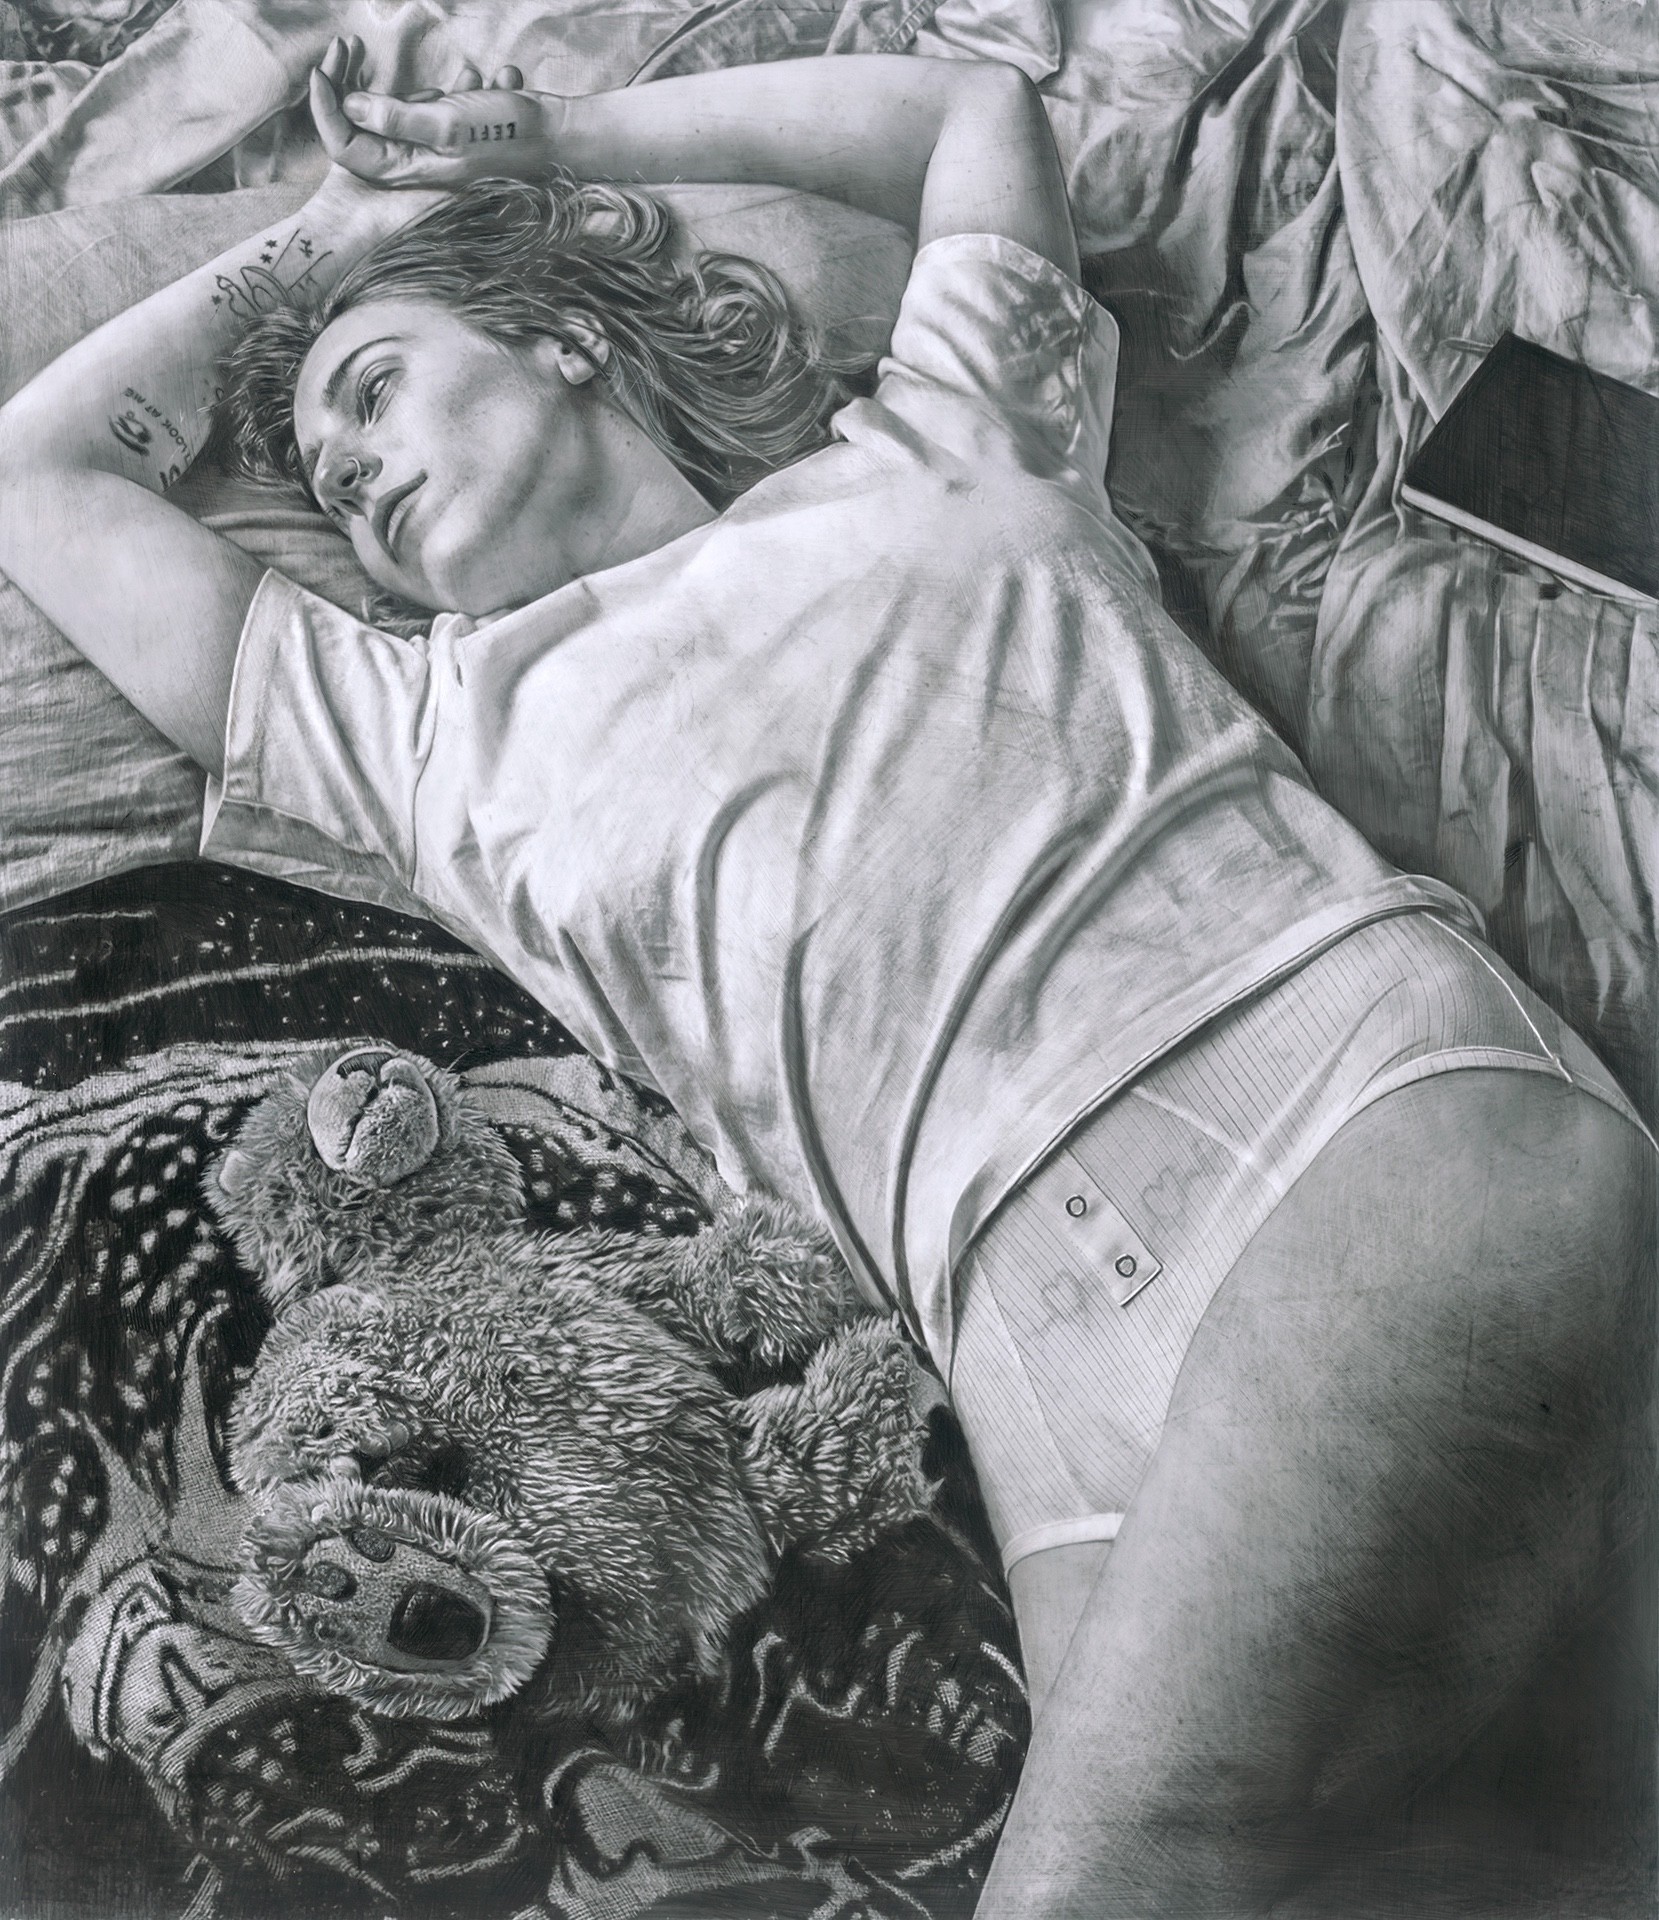 PleinAir Magazine's 12th Annual PleinAir Salon August 2022 Top 100 Tracy Frein Drowning in my FearStained Sheets Drawing